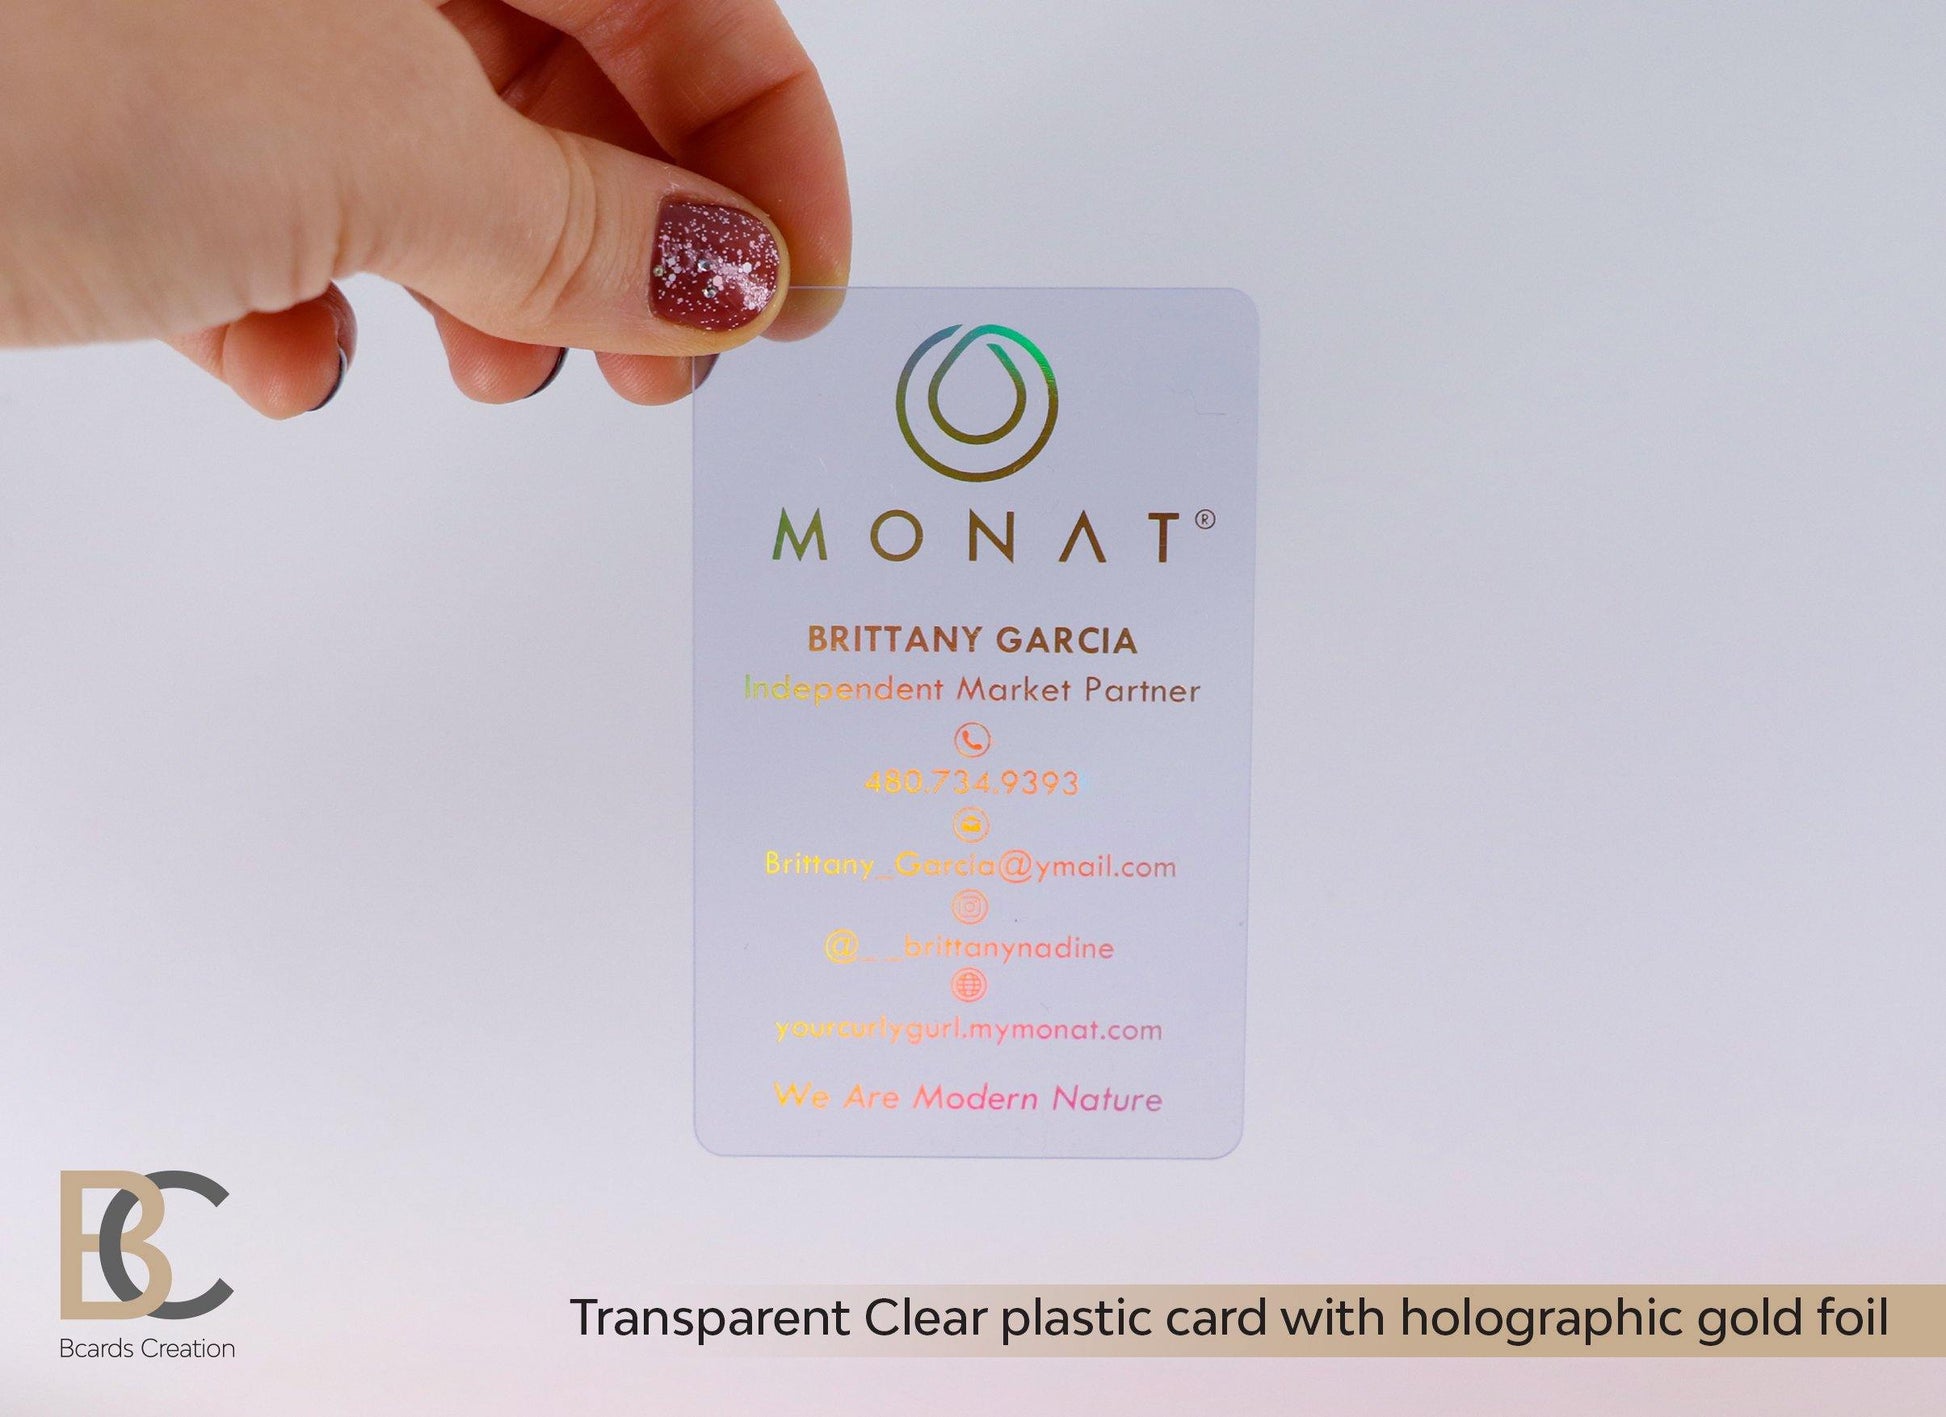 MONAT LOGO Clear Business card with Holographic gold, Neon foil. Glossy Transparent Plastic Business Cards, 1-3 Foils - BcardsCreation